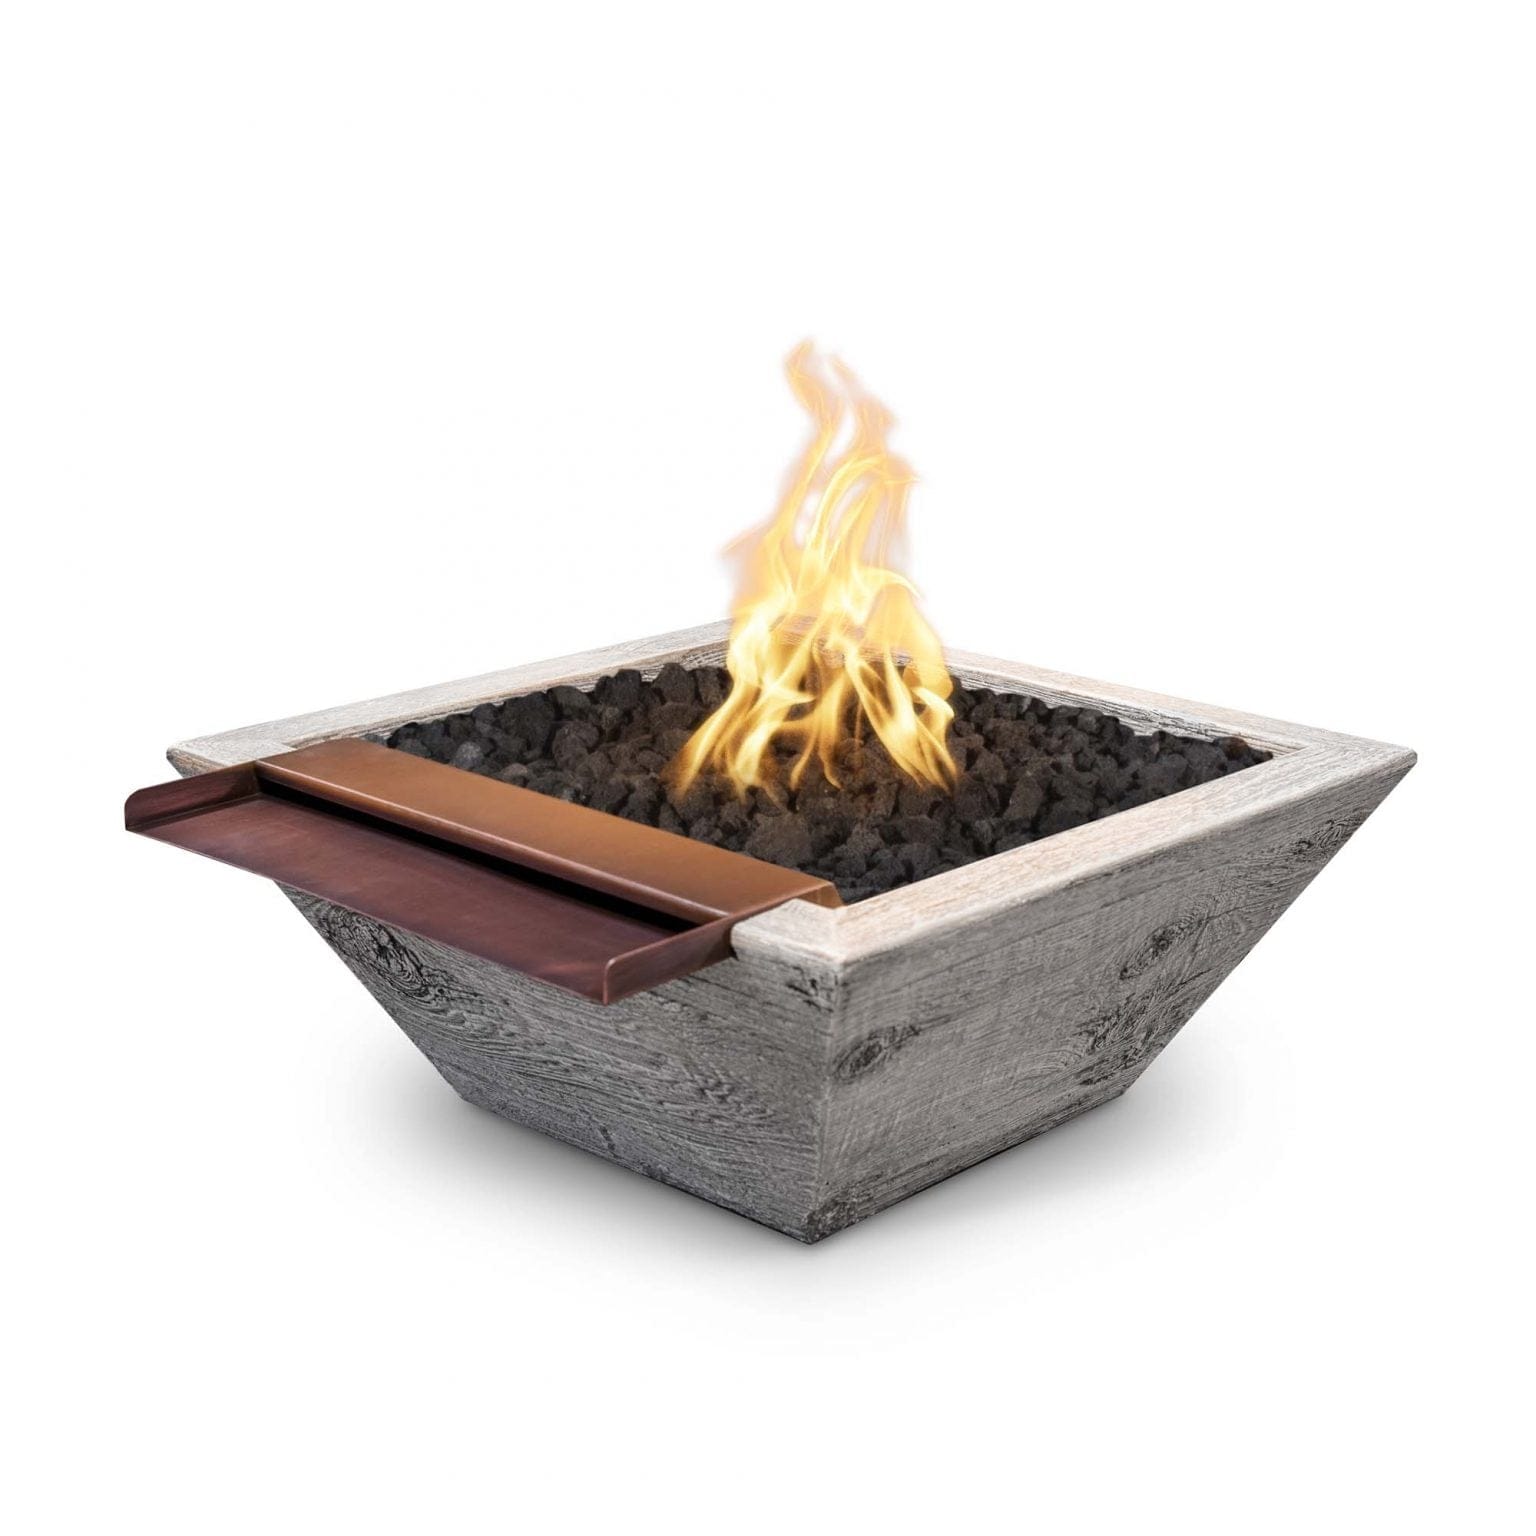 The Outdoor Plus Fire & Water Bowl 24" / Low Voltage Electronic Ignition The Outdoor Plus Maya Fire & Water Bowl Wide Spill | Wood Grain Concrete OPT-24SWGFWWSE12V